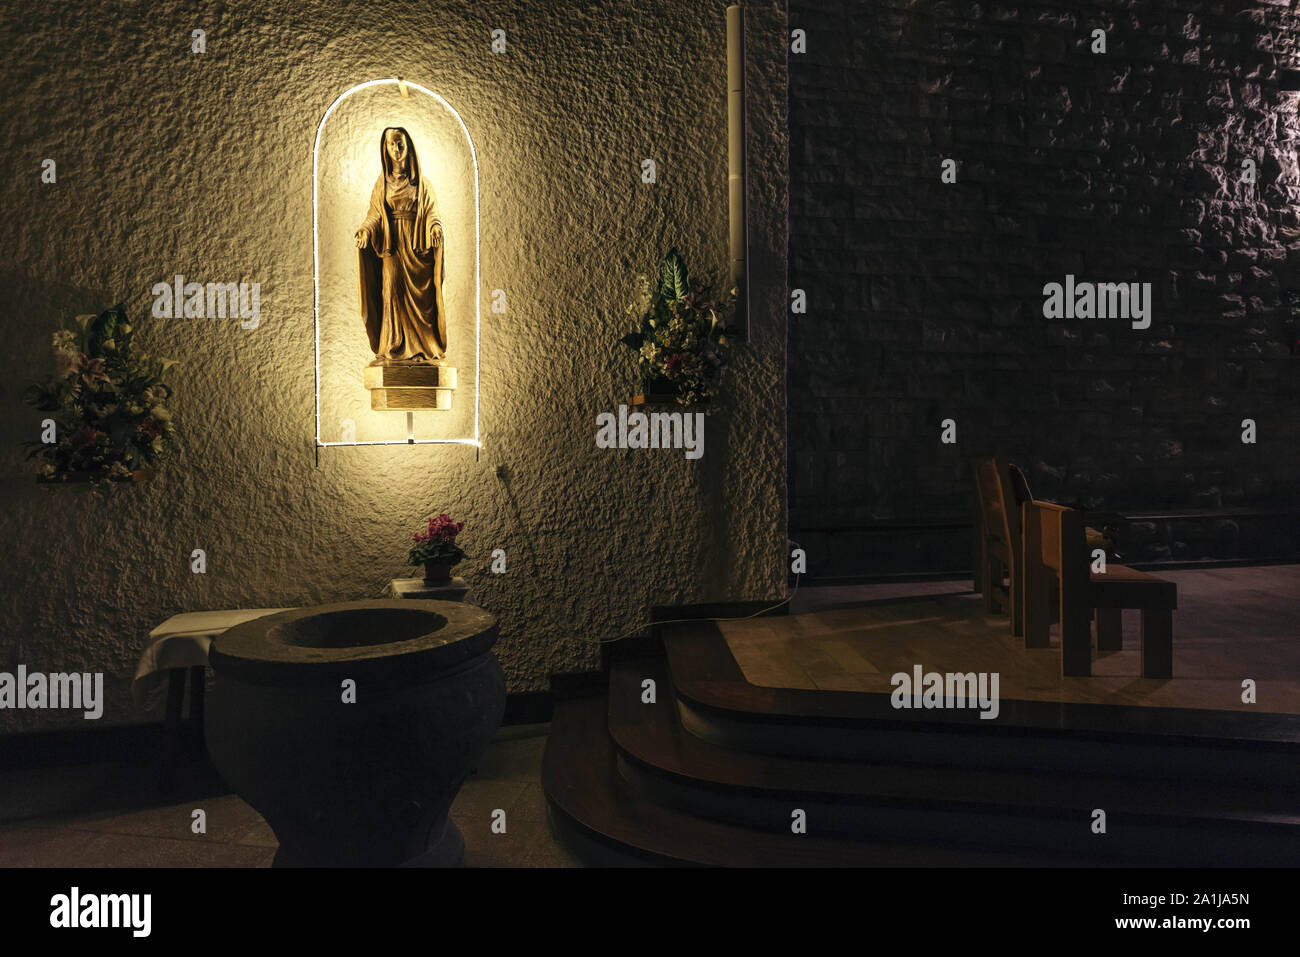 La Clusaz (eastern France). 2019/01/16: Statue of the Virgin illuminated in a niche in the church of the village Stock Photo